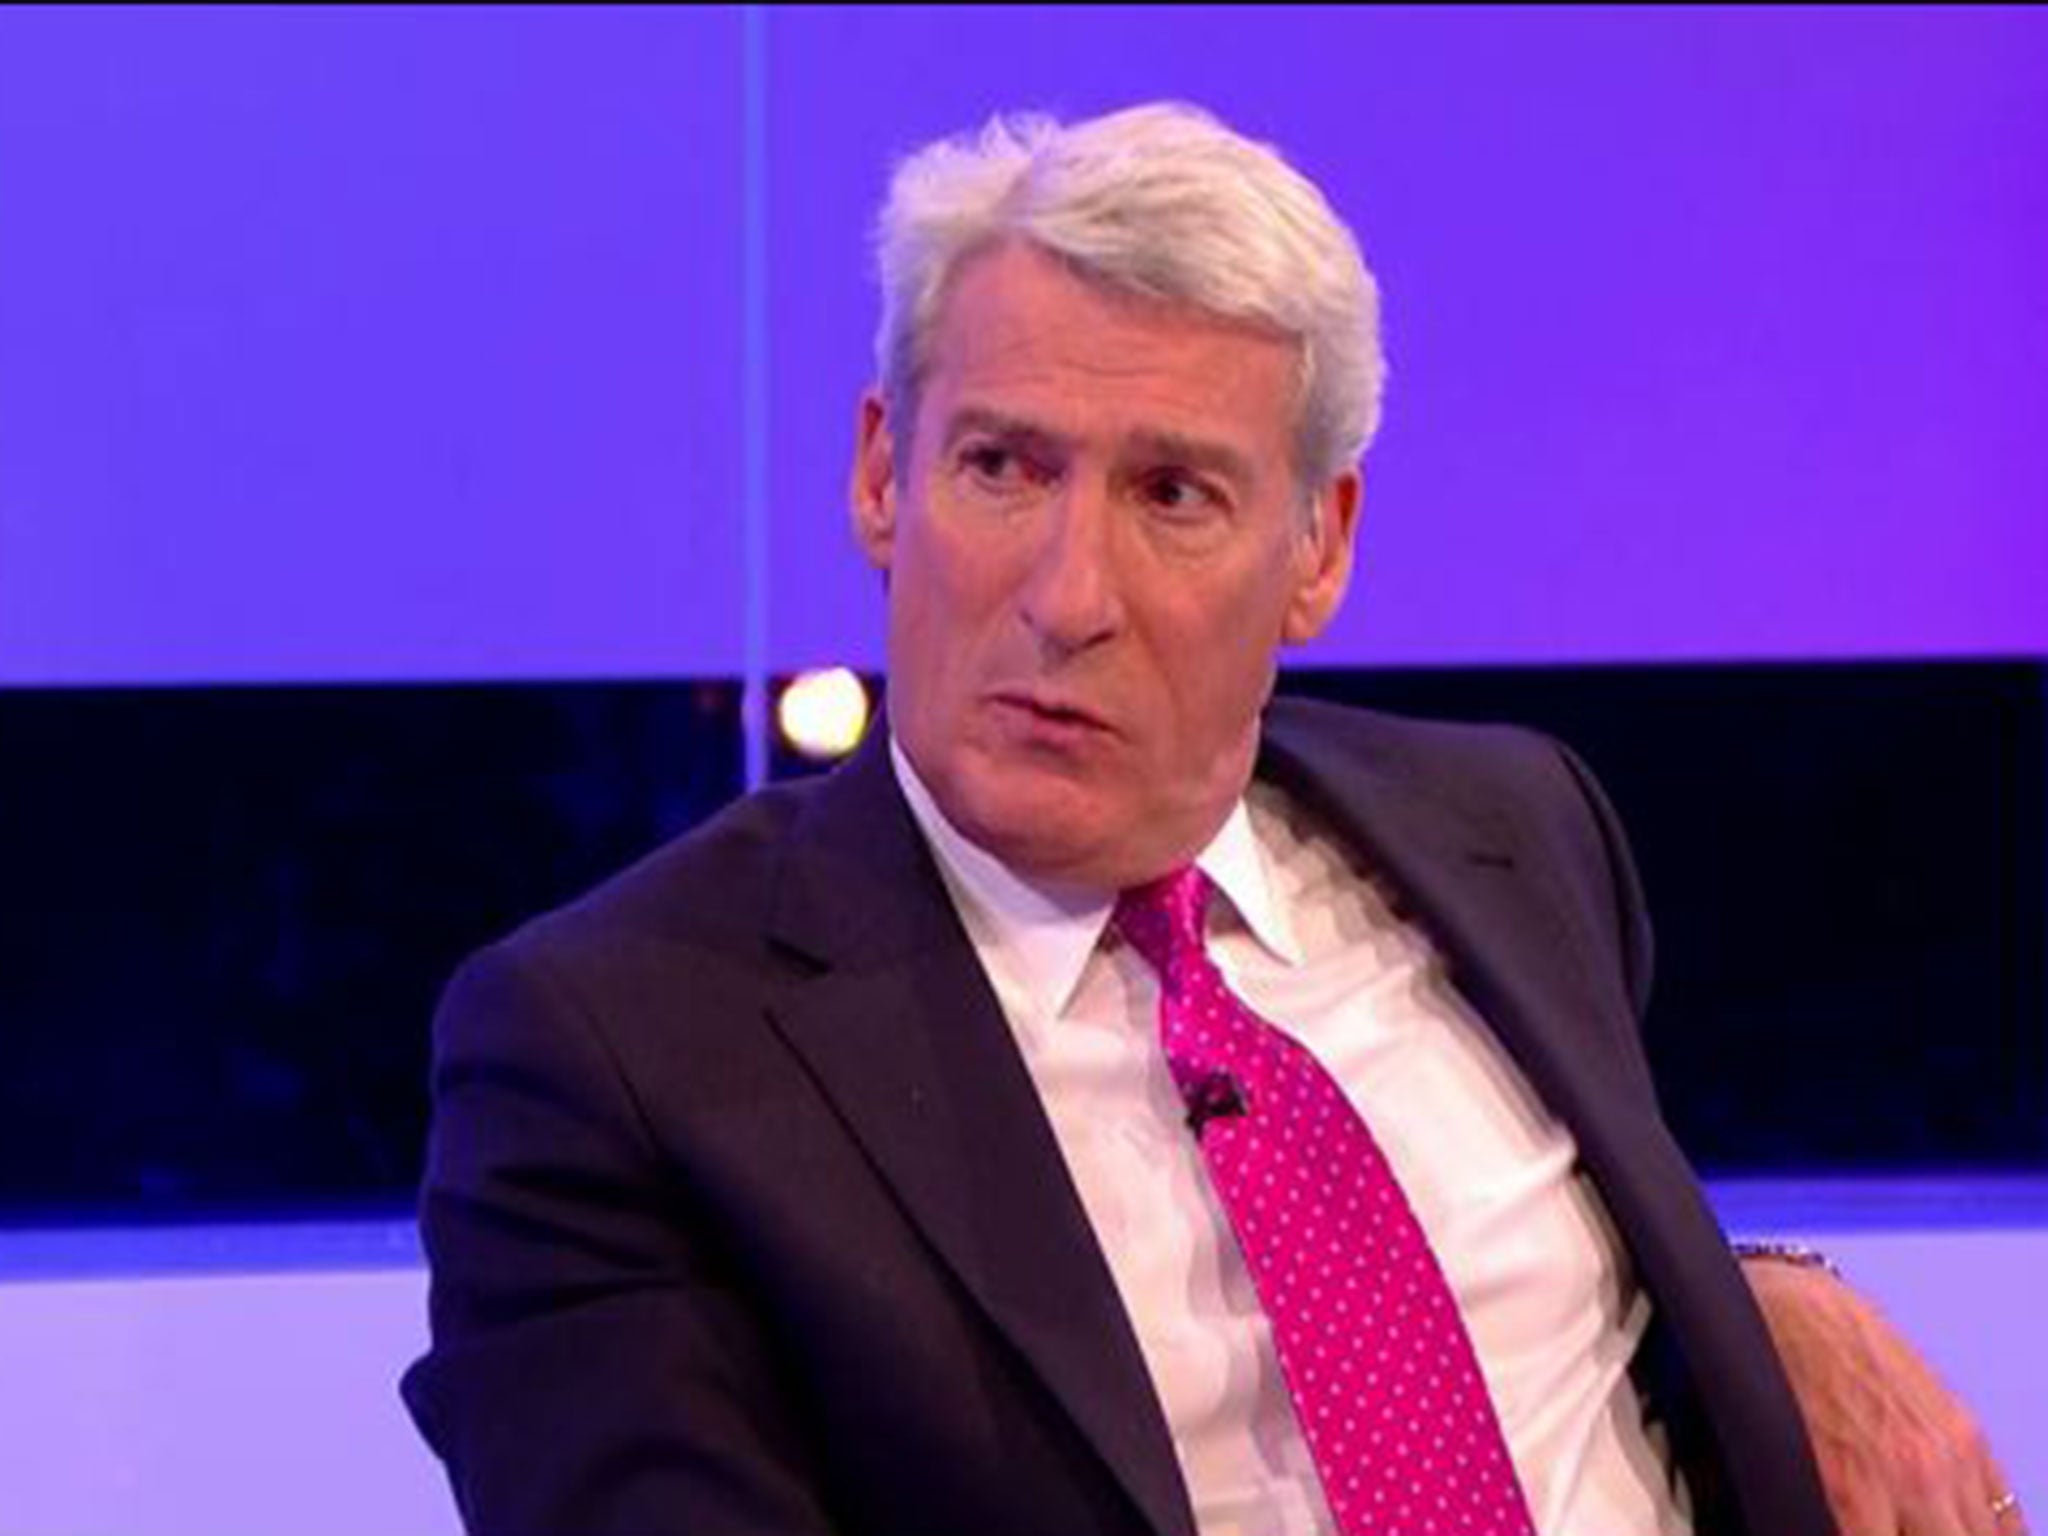 Paxman on Channel 4's Alternative Election coverage